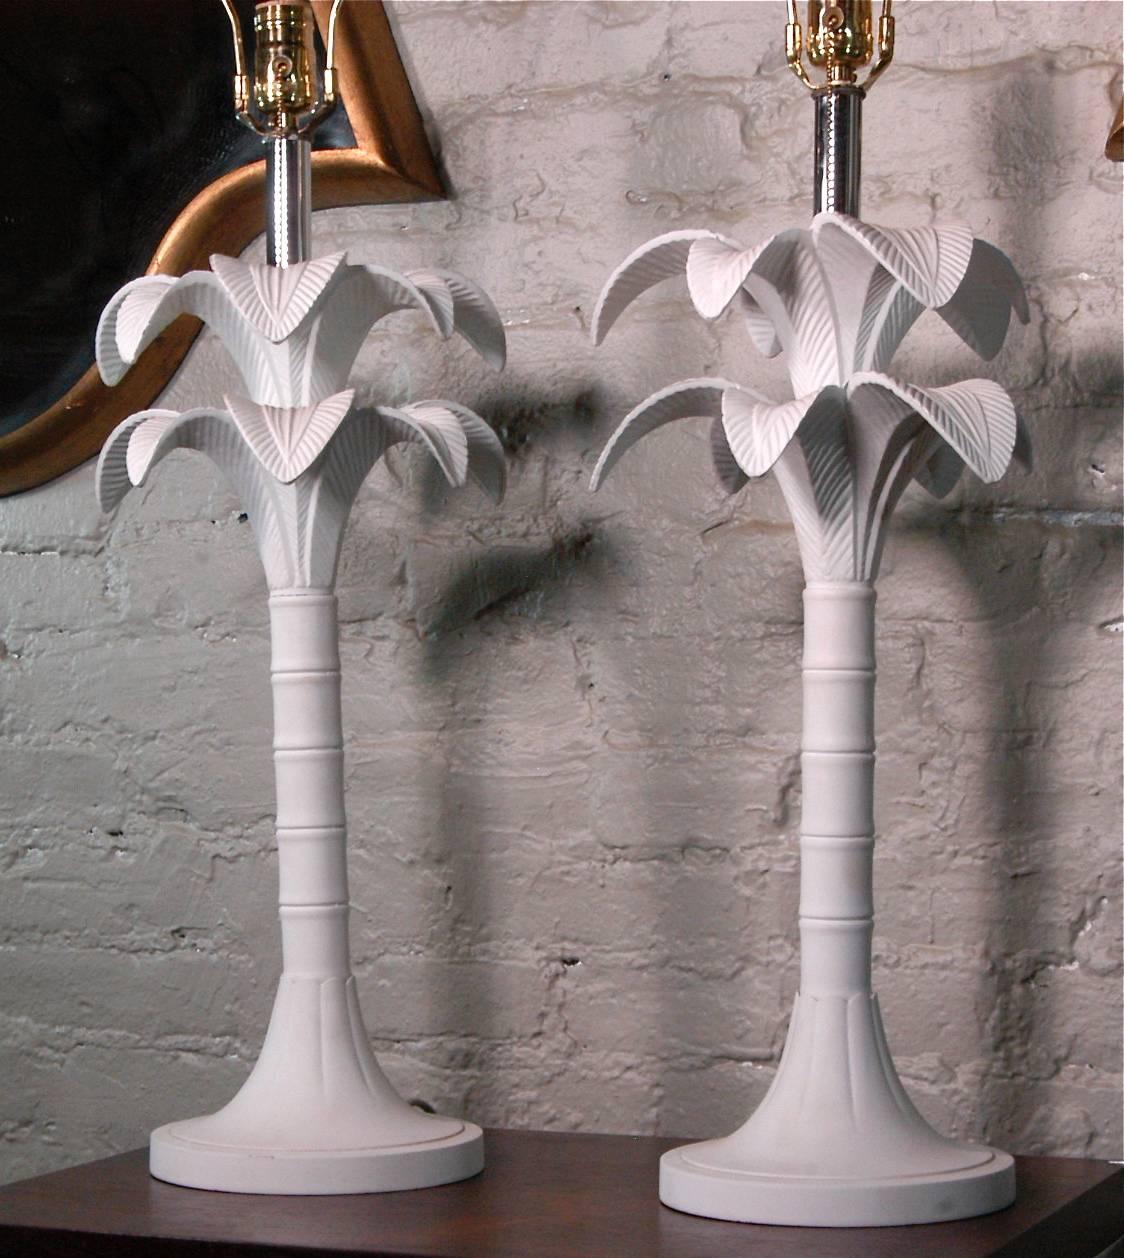 Lovely pair of Hollywood Regency table lamps featuring stems of cast metal palm trees lacquered in a white matte finish with chrome accents.

The lamps measure: 32.5in height to the top of the harp, 10in diameter at the leaves and 8in diameter at